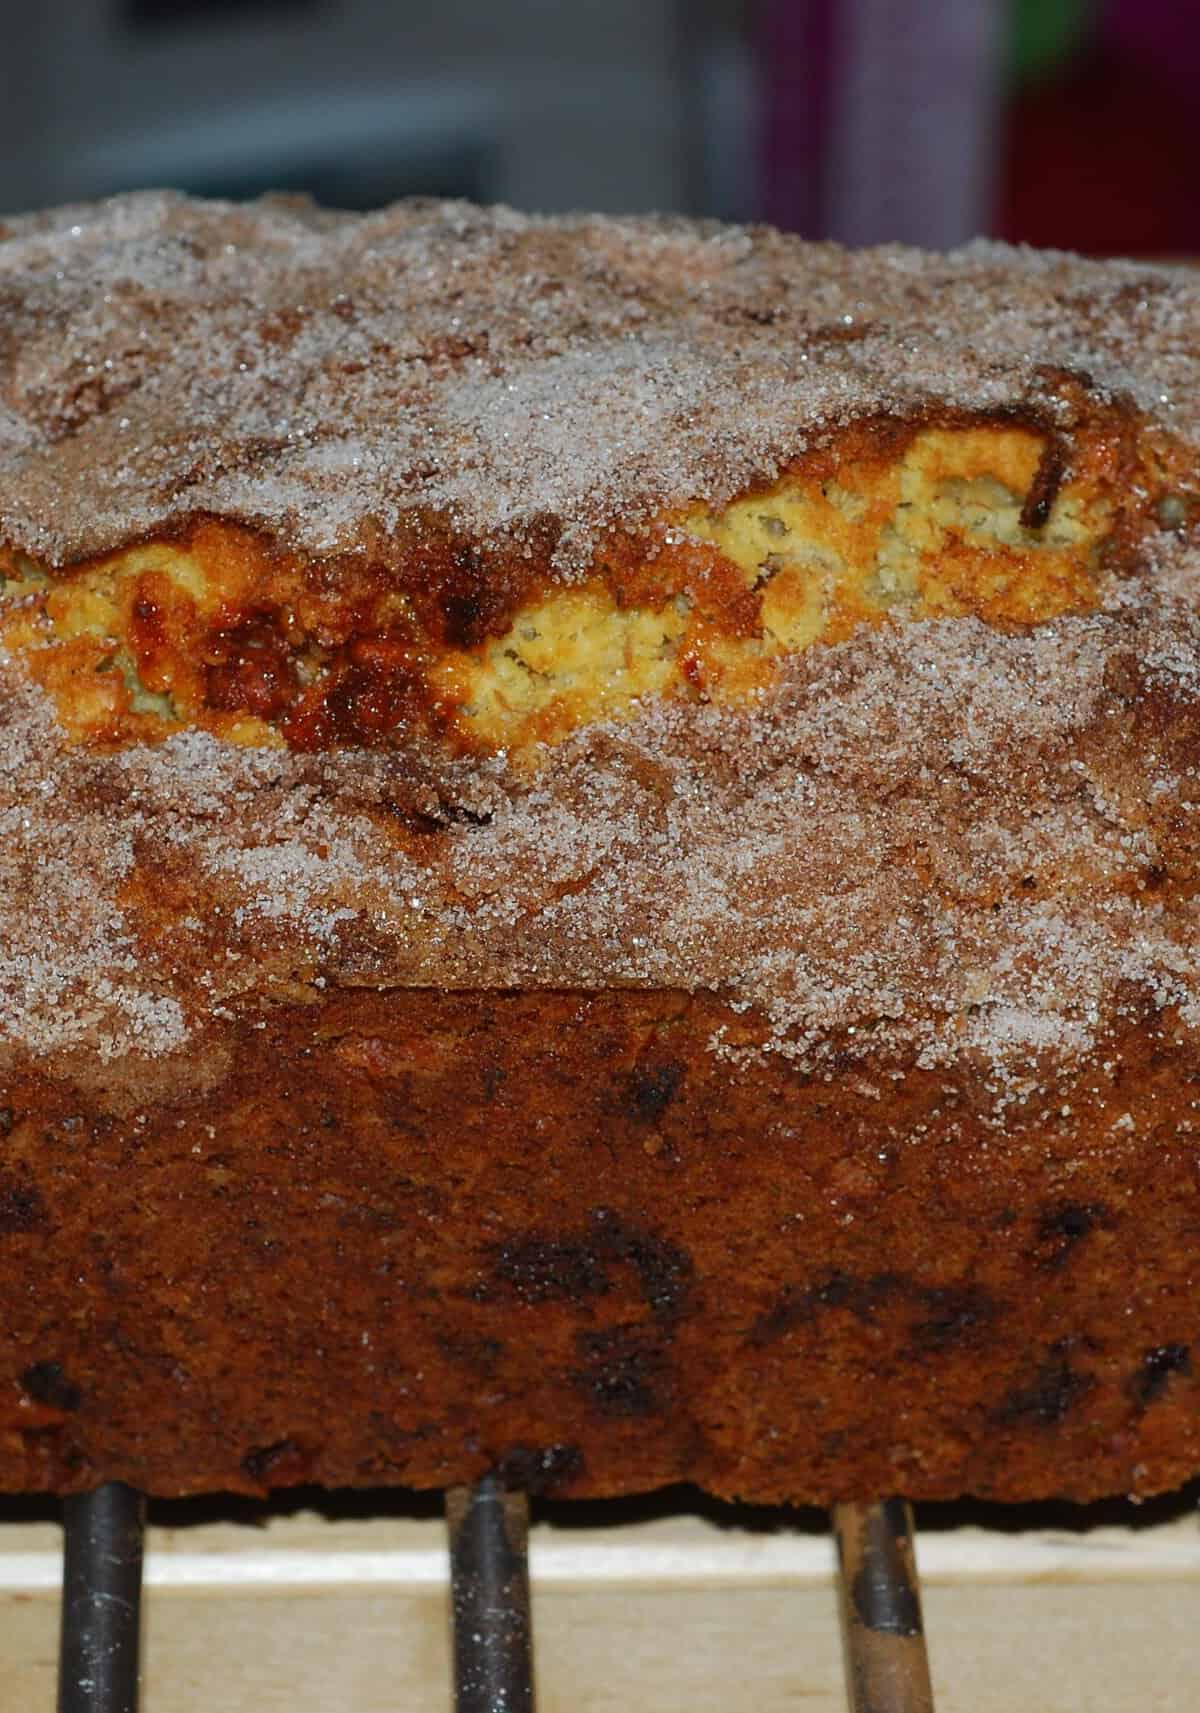  Dig into this delicious loaf of Nana's Banana Bread, warm from the oven.